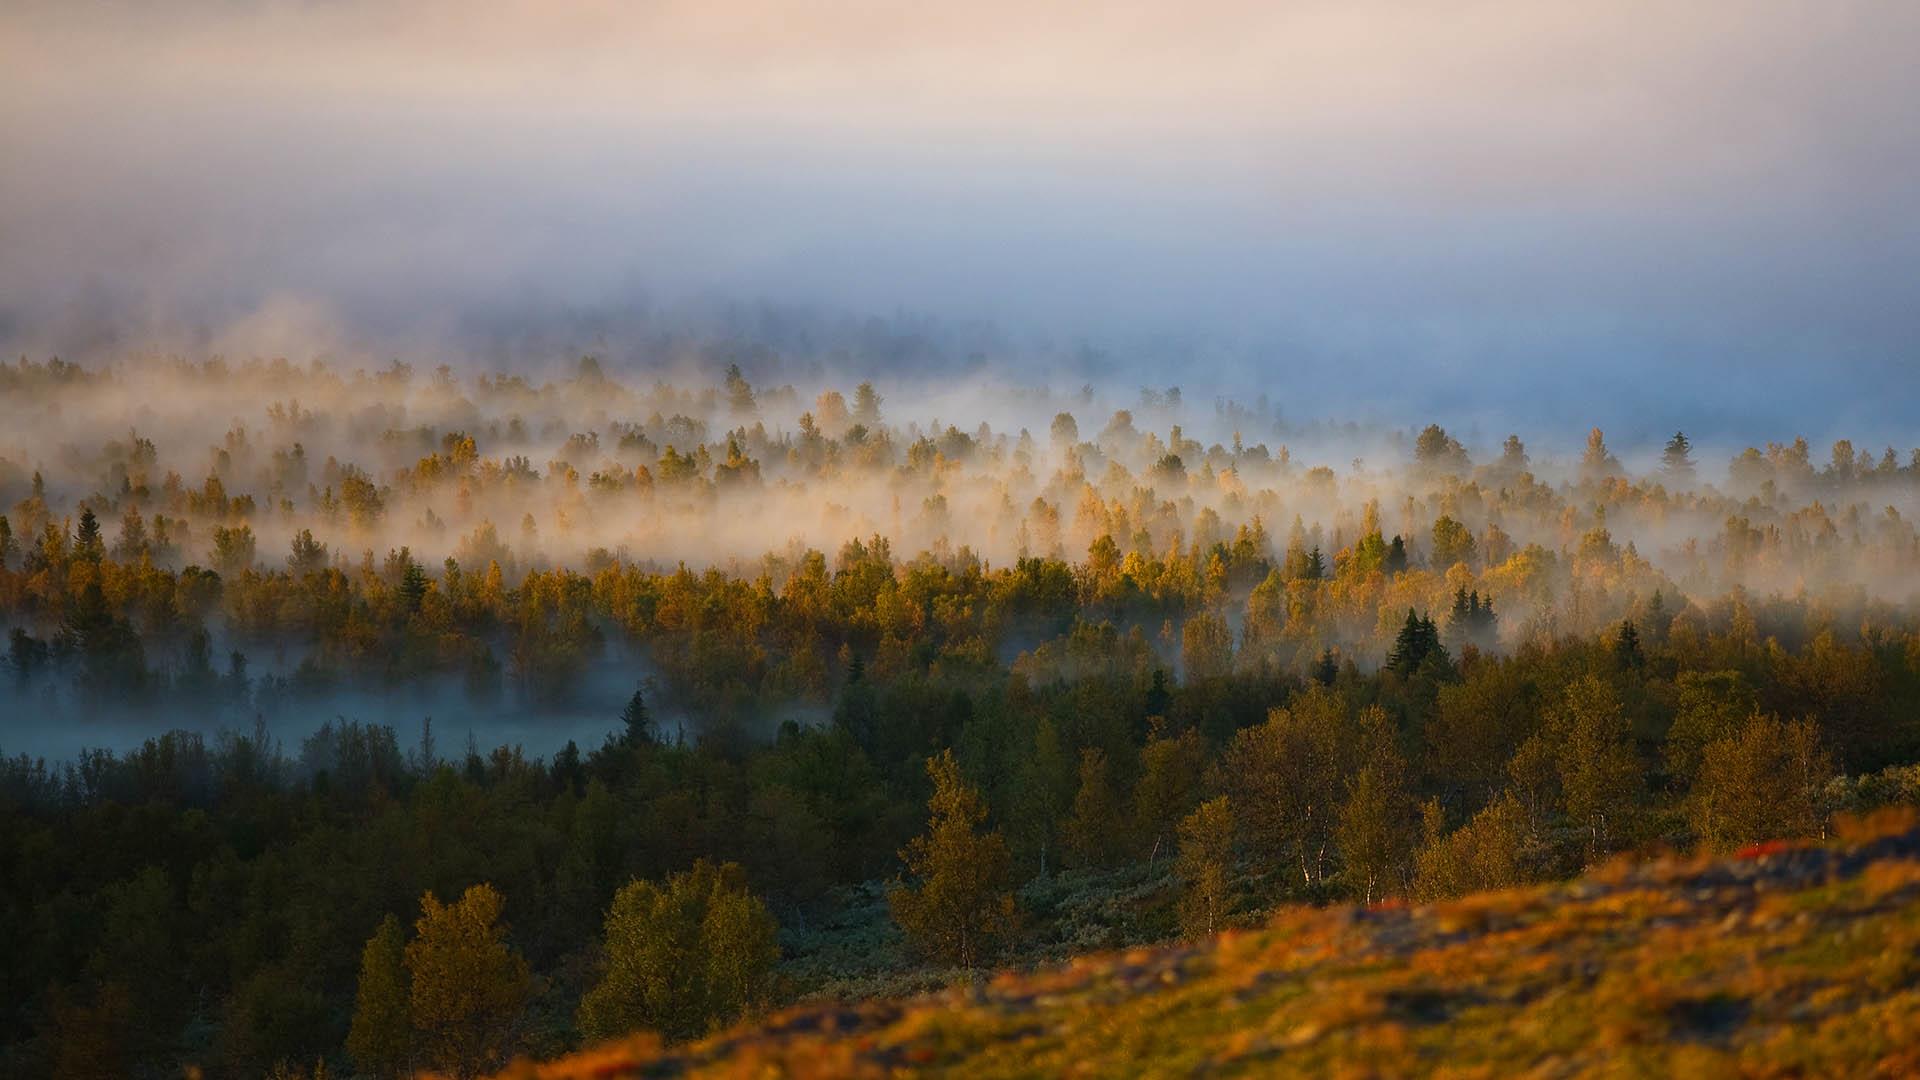 View over a mountain birch forest in autumn, while morning mist lingers around the treetops like islands and the sun is breakting through.